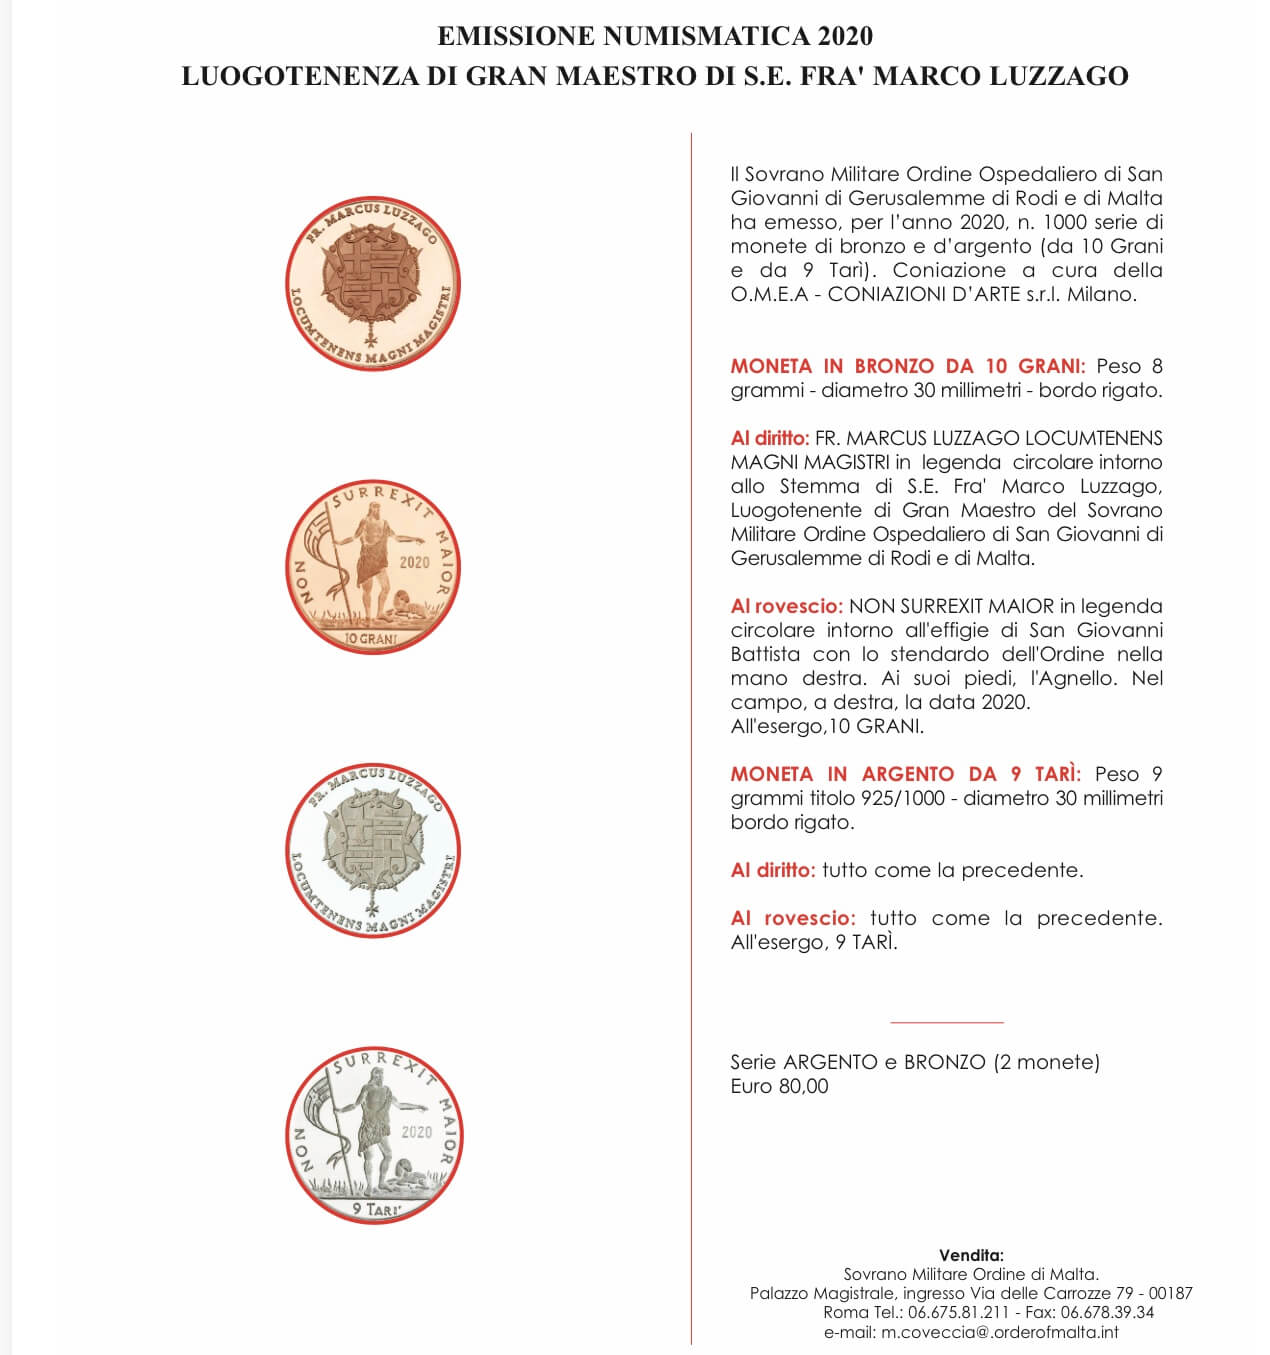 Bronze and silver scudo coins, issued by the Sovereign Military Order of Malta. <br /> <i>Source: https://www.orderofmalta.int/</i>